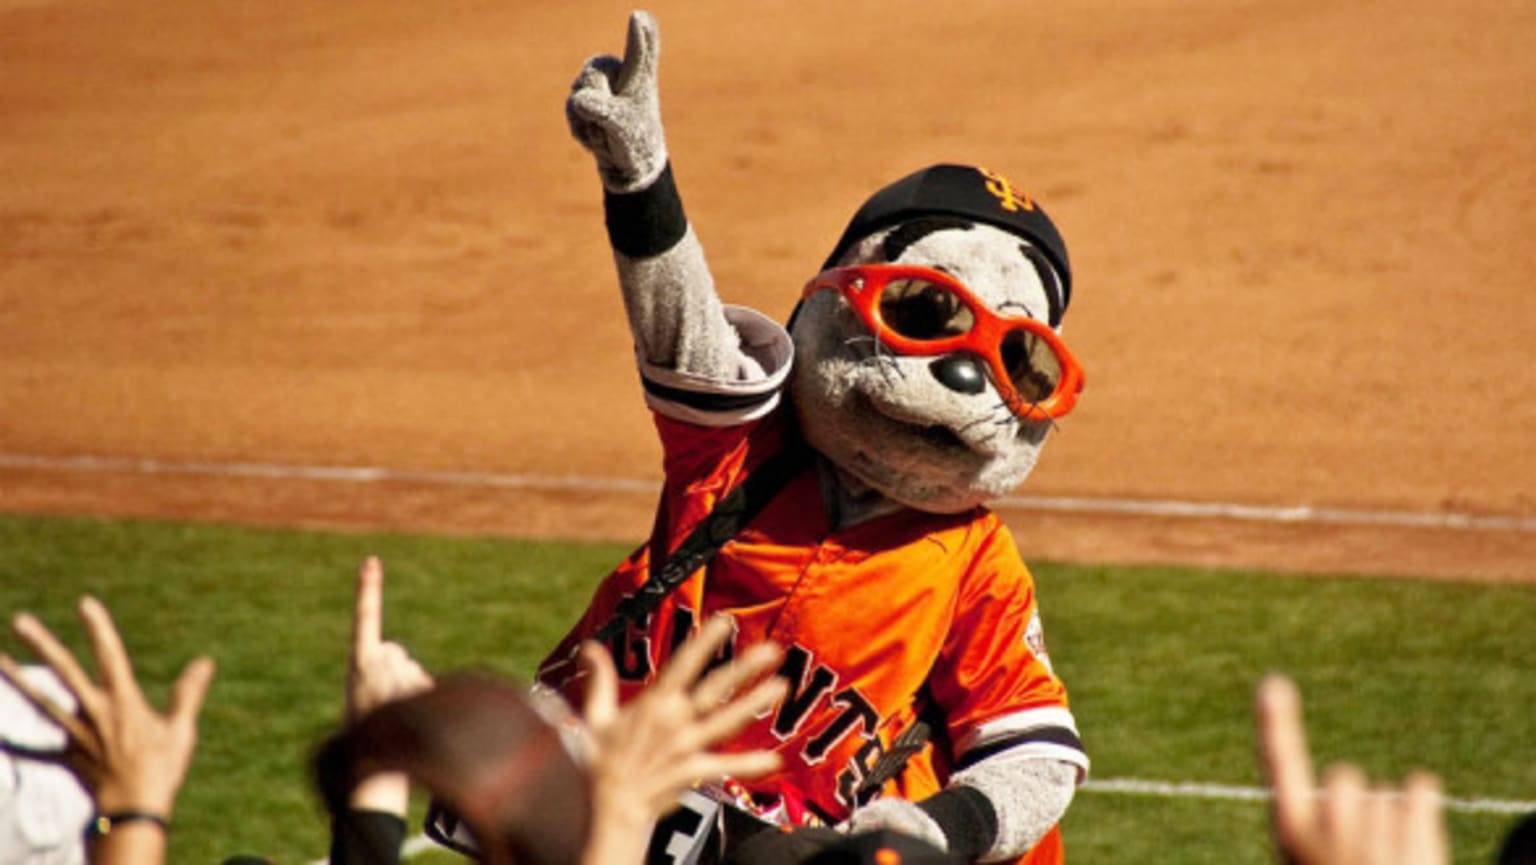 The San Francisco Giants mascot Lou Seal stands on the field